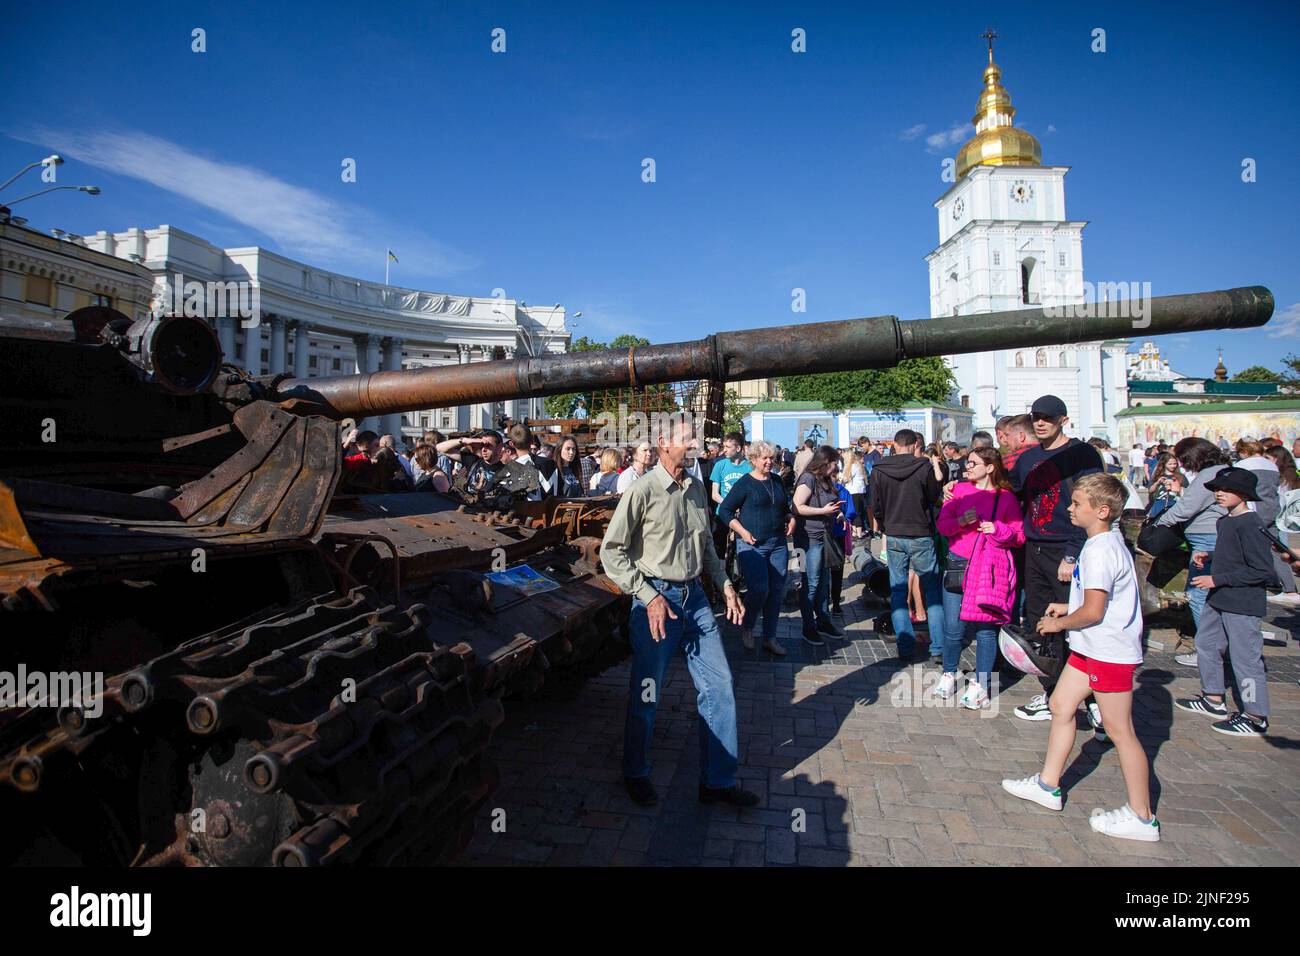 People look at the destroyed Russian tank during an exhibition showing Russian military hardware destroyed during Russia's invasion of Ukraine in central Kyiv. On February 24, 2022, Russian troops entered Ukrainian territory, starting a conflict that provoked destruction and a humanitarian crisis. Stock Photo